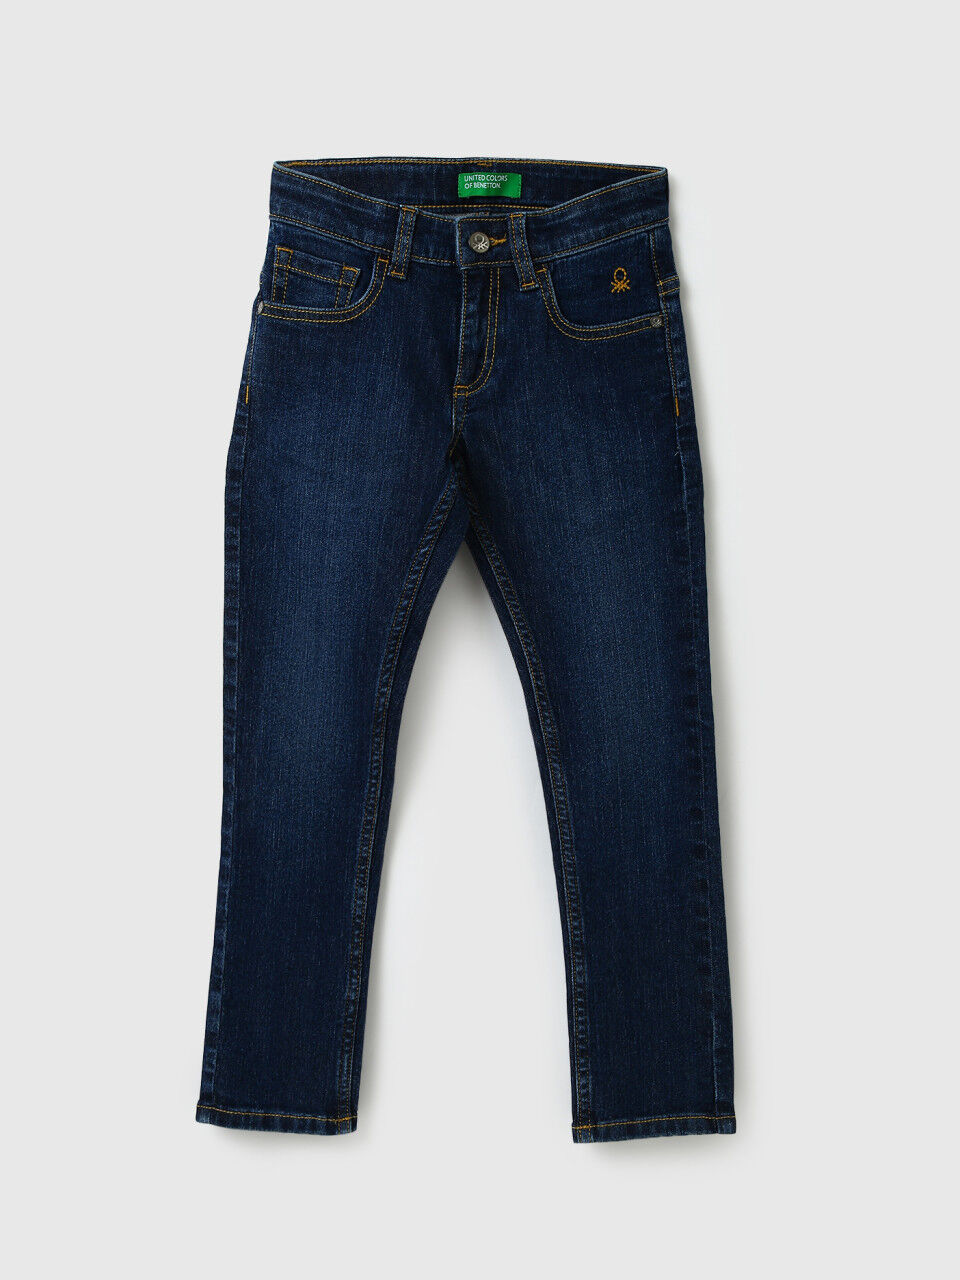 Boys Solid Slim Fit Jeans